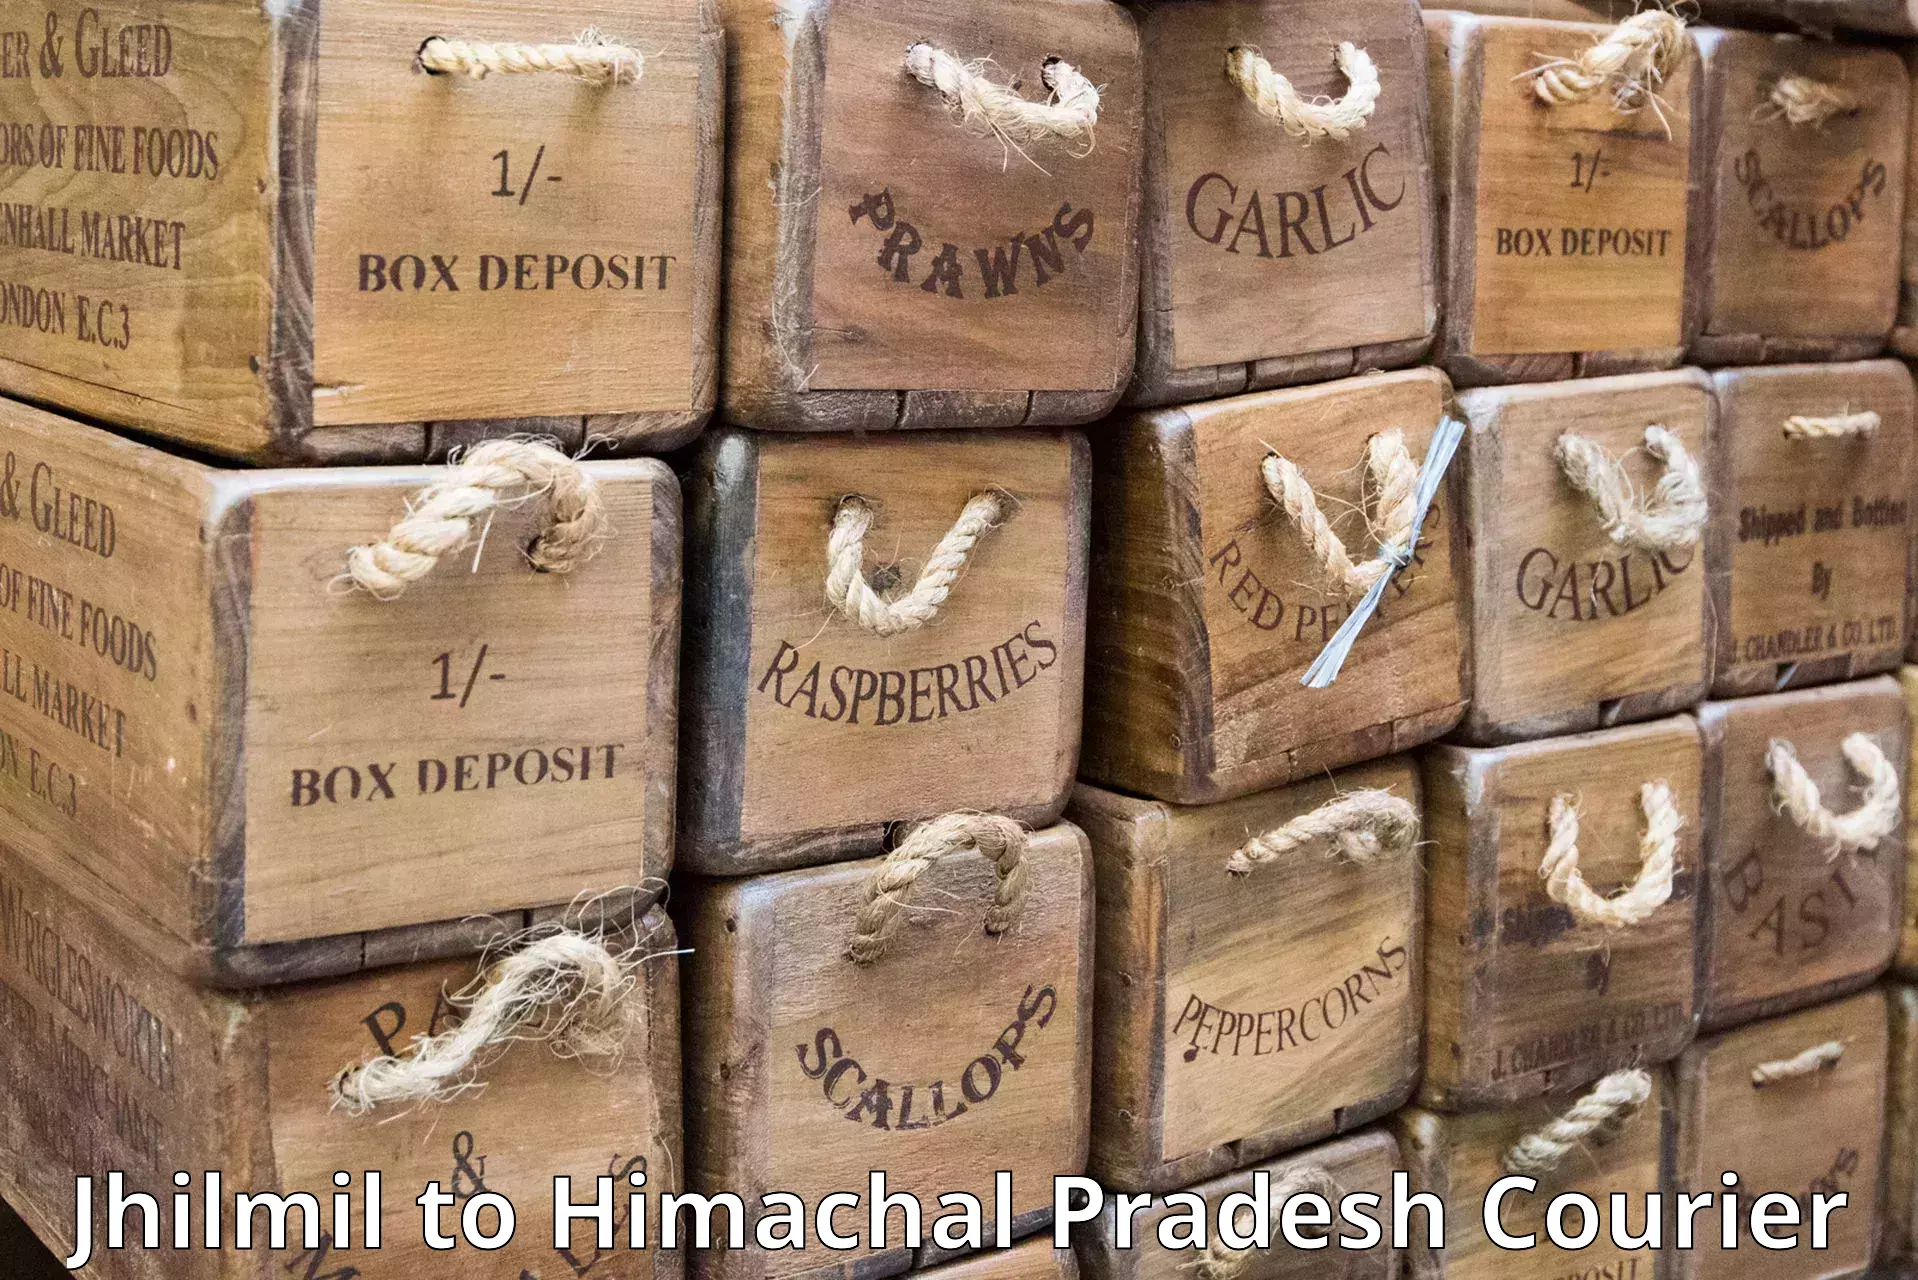 Customer-centric shipping Jhilmil to Gagret